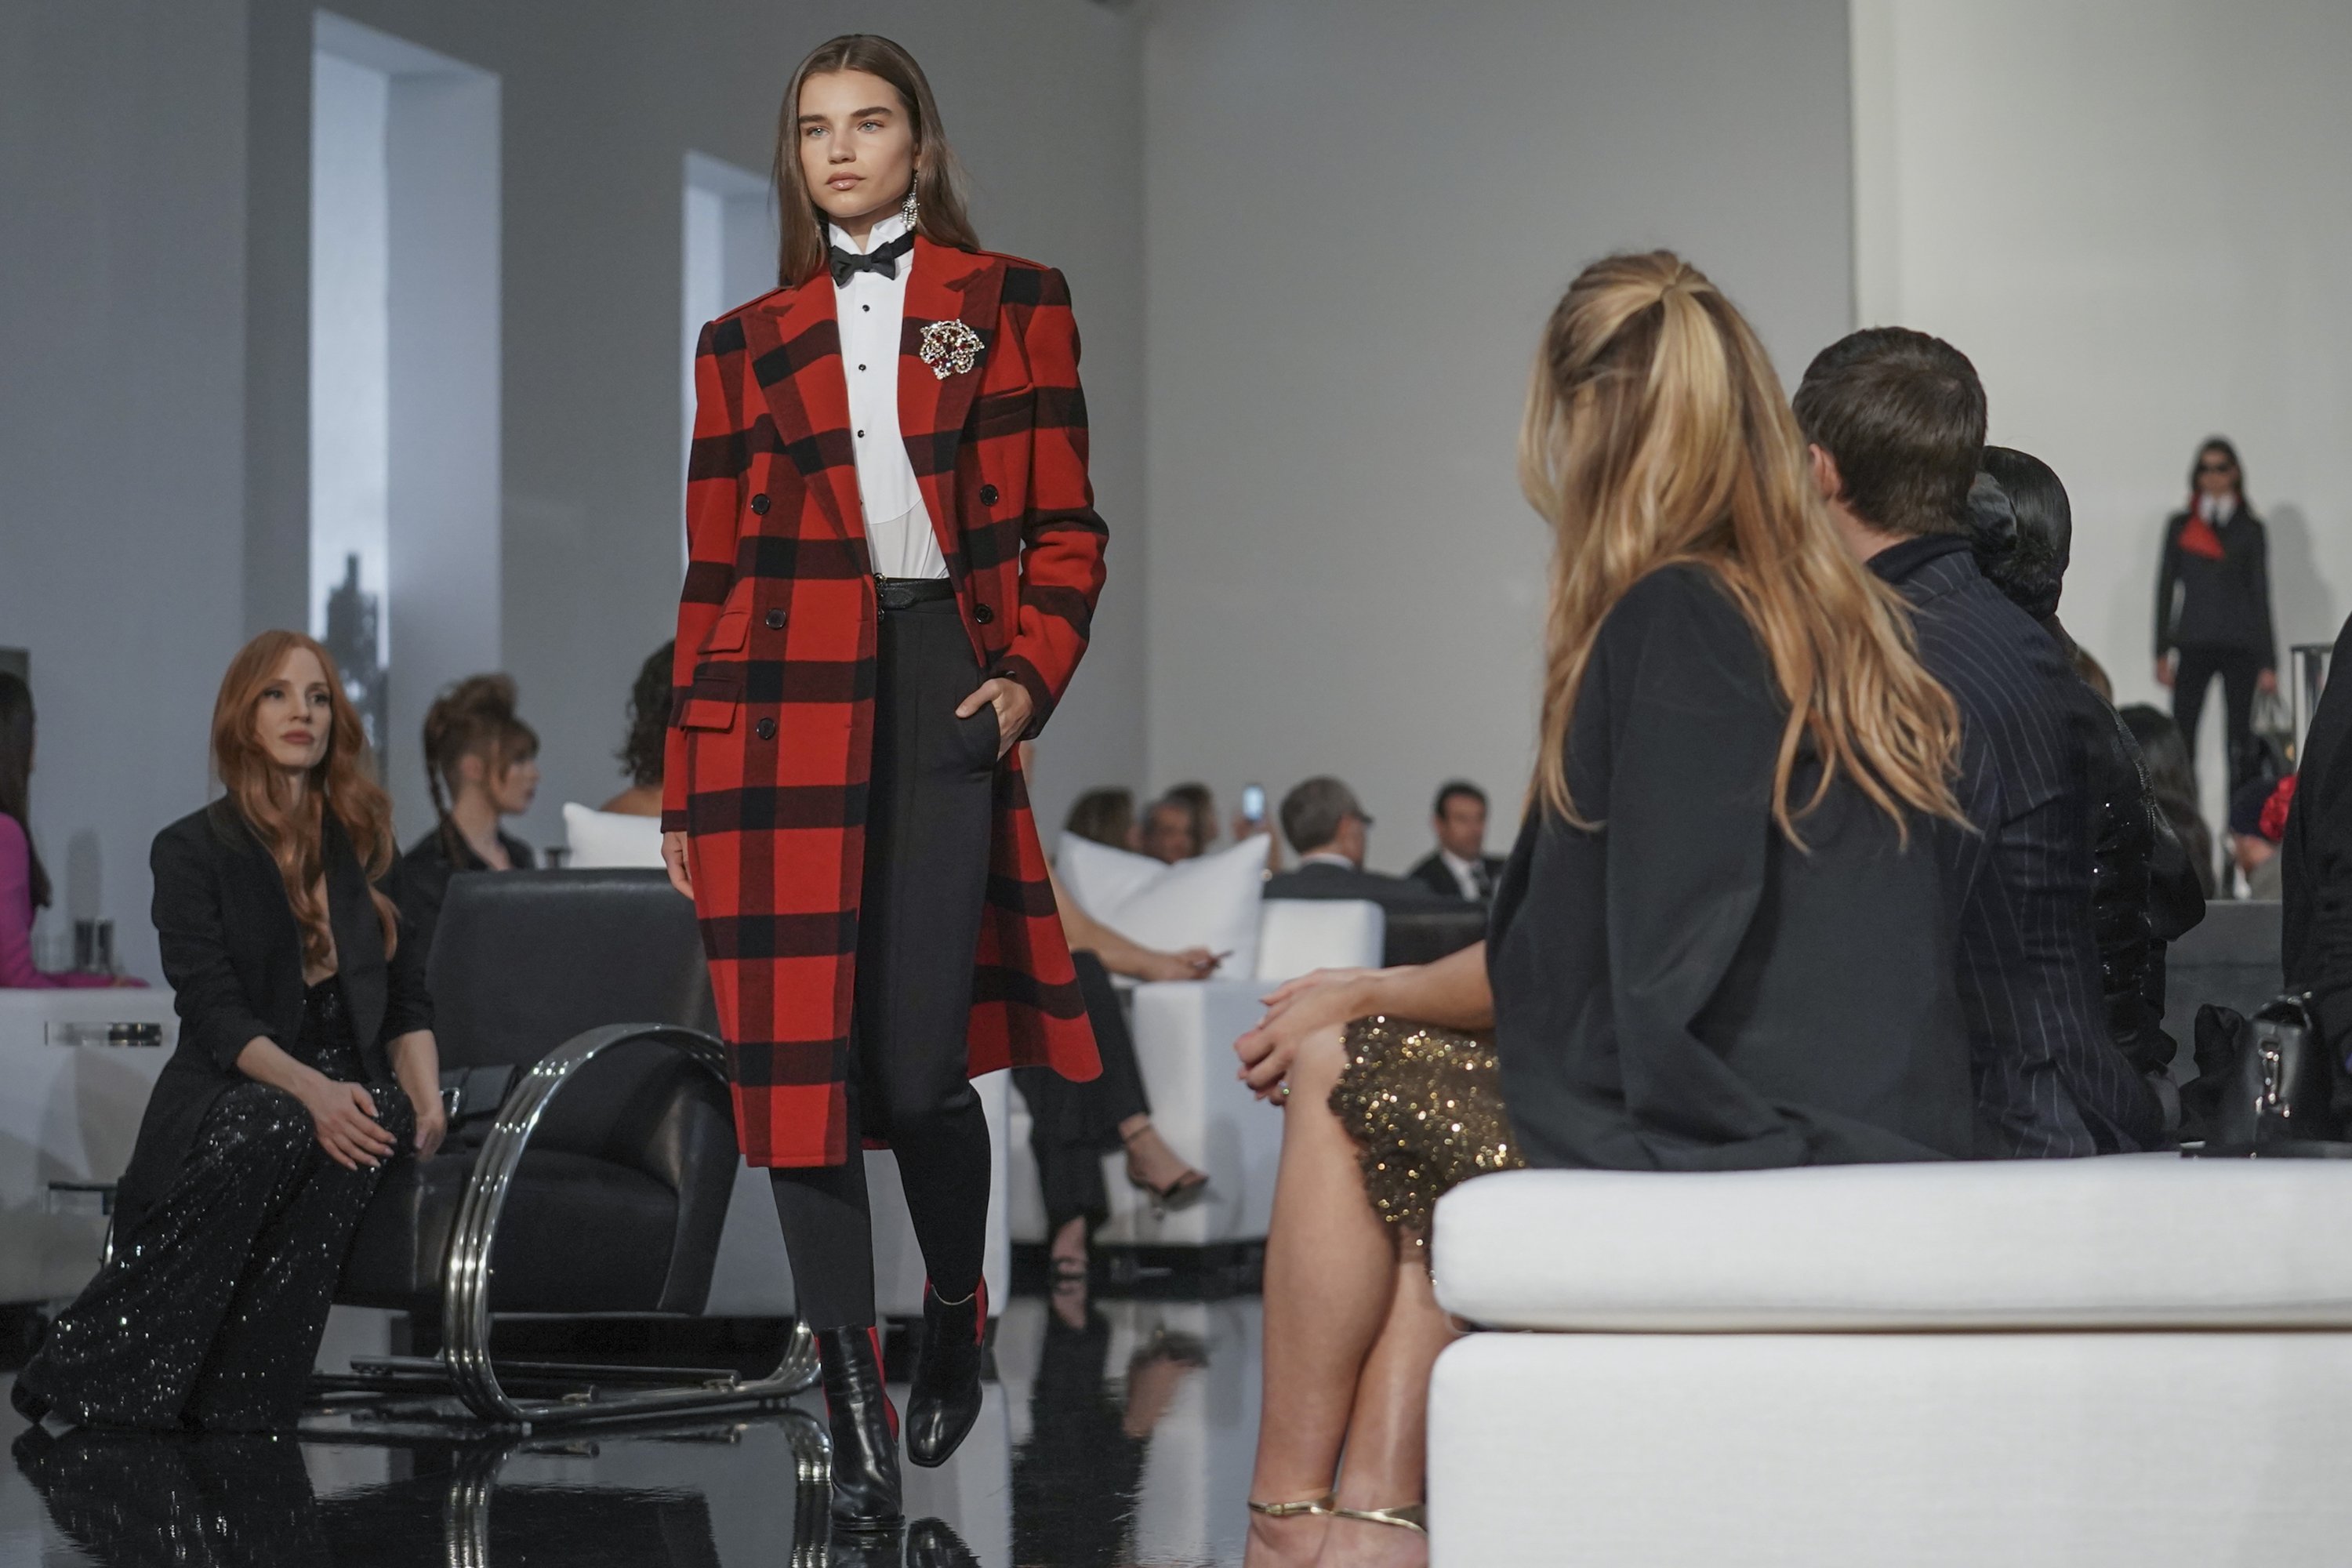 Ralph Lauren's 2022 fashion show brings home coziness to stage Daily